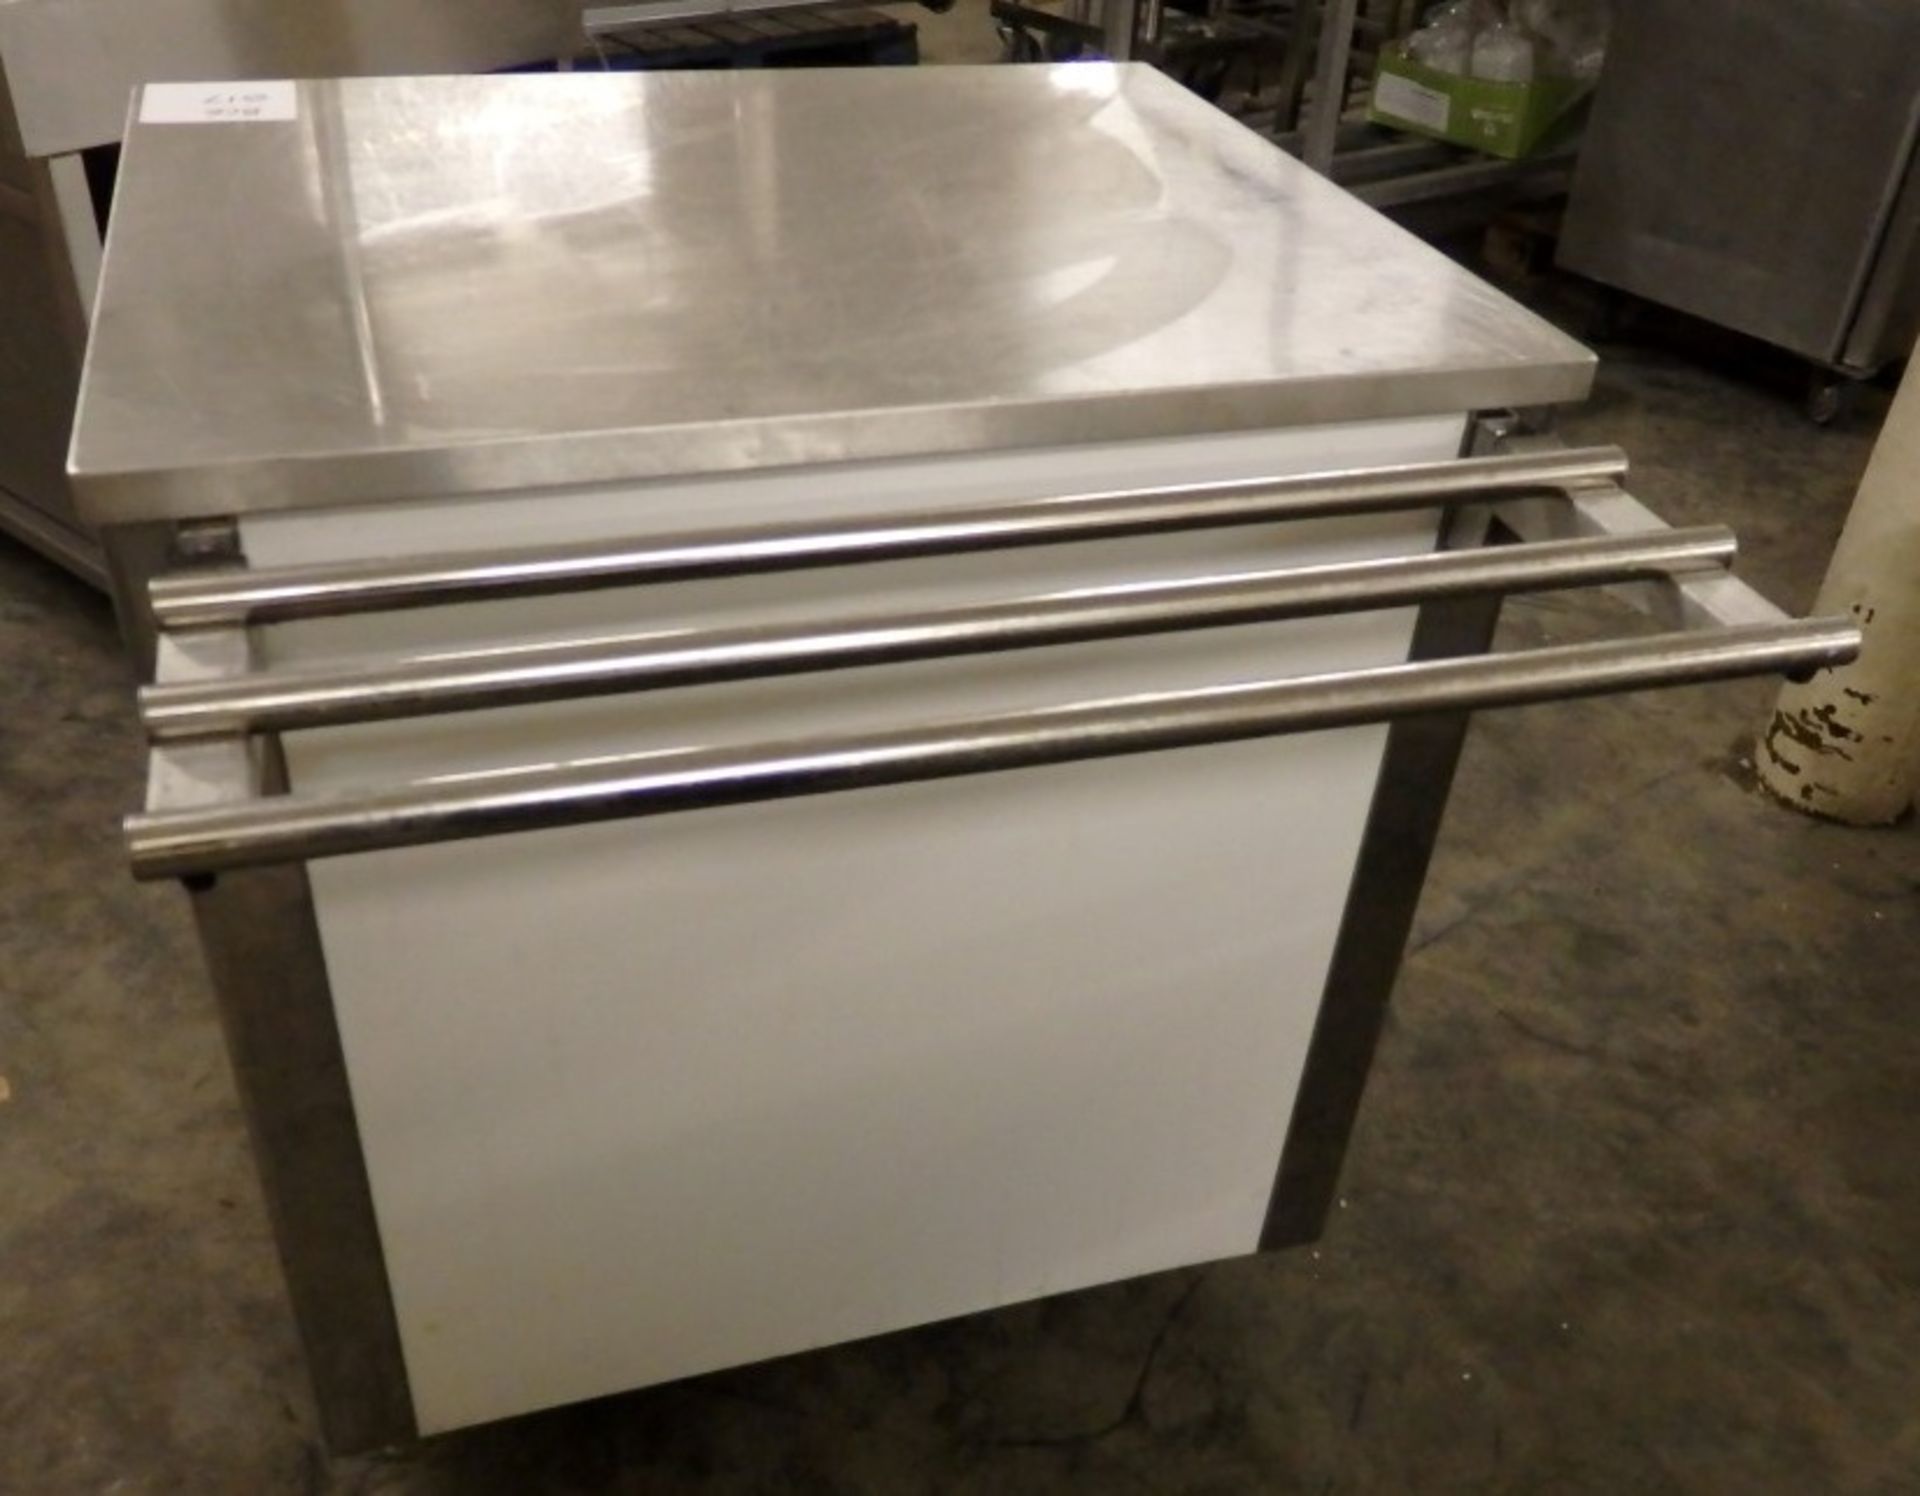 1 x Serving Counter With Storage - On Castors For Maneuverability - Ideal For Pub Carvery, Canteens, - Image 2 of 8